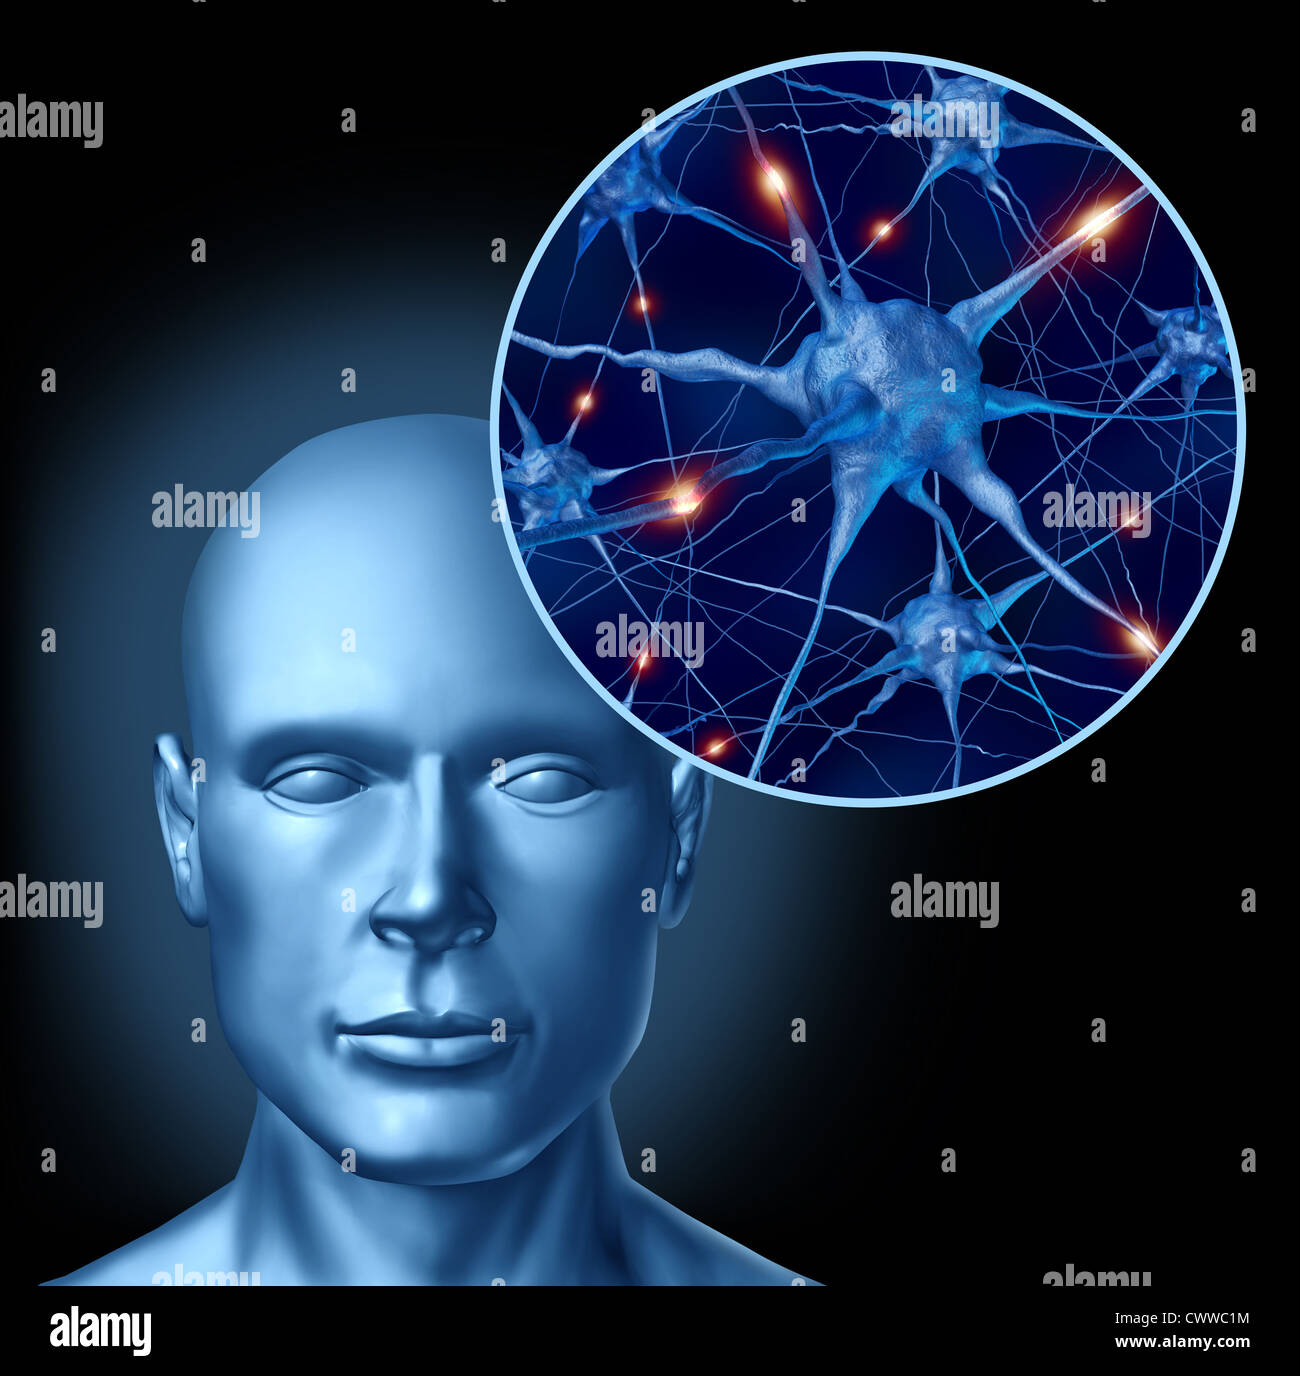 Human intelligence brain medical symbol represented by a close up of active neurons and organ cell activity related to neurotransmitters showing intelligence with memory and healthy cognitive thinking activity. Stock Photo